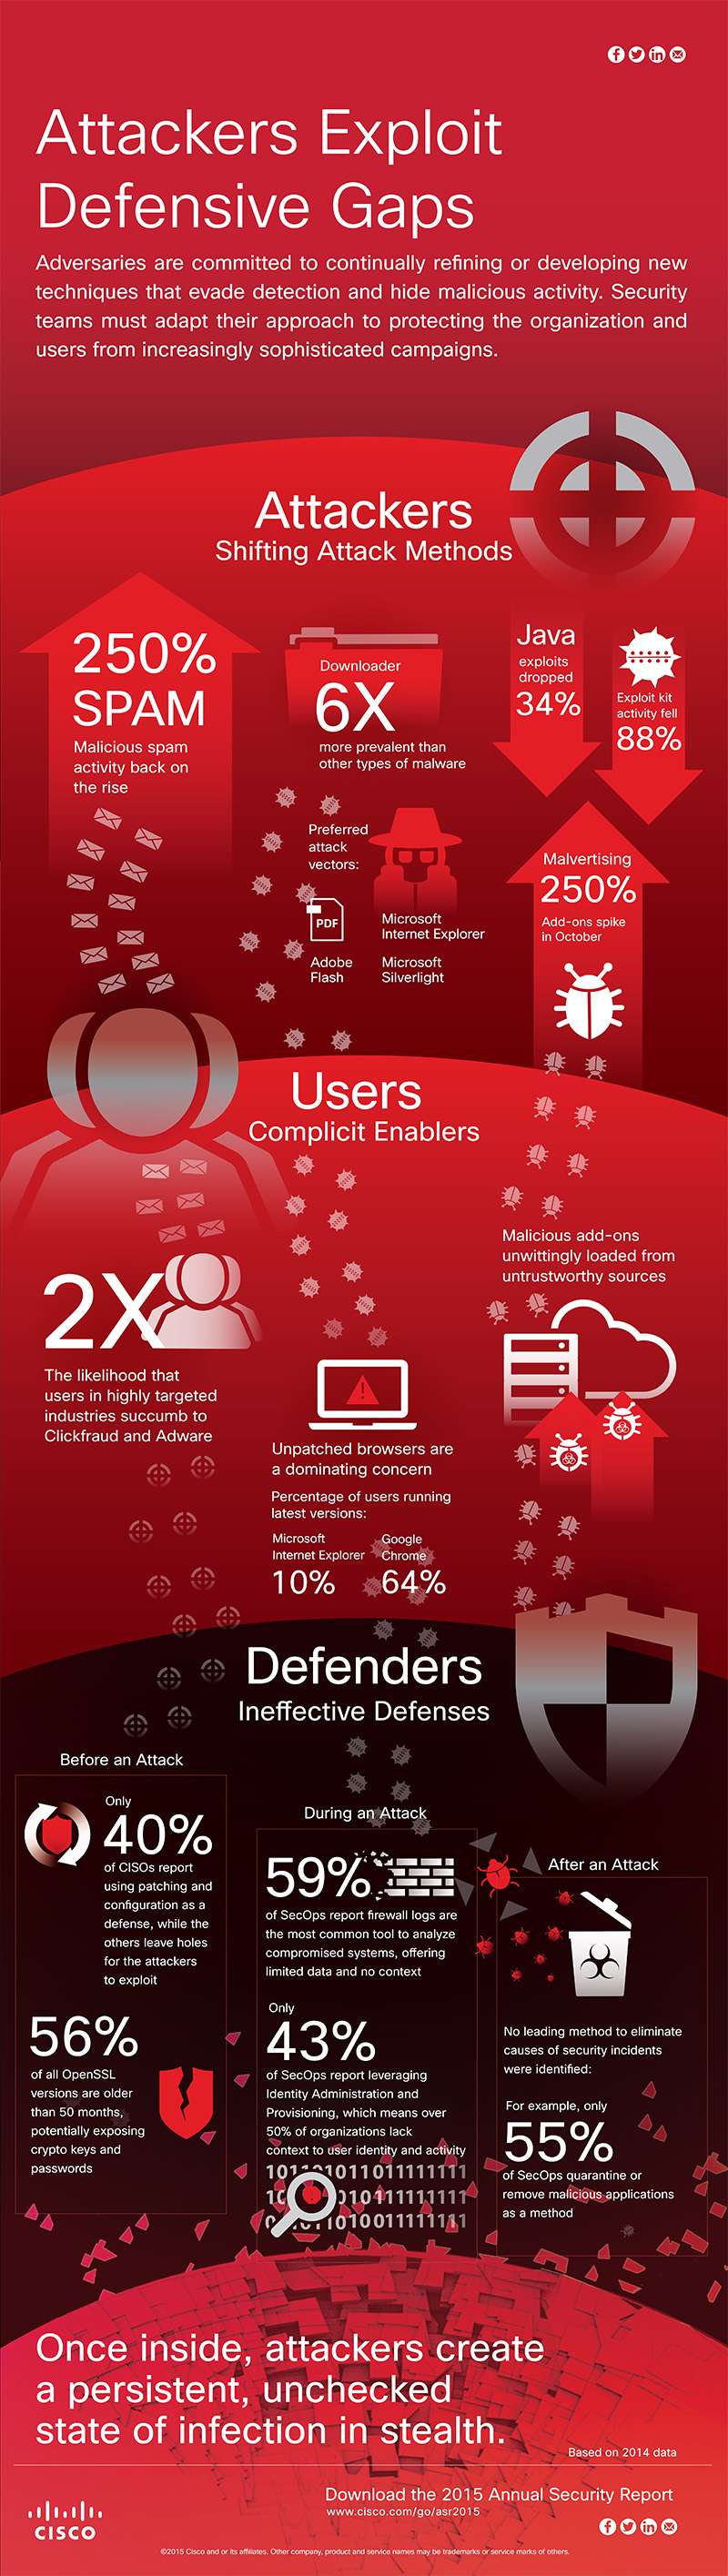 Cisco_ASR_Overview_Infographic_011615-1